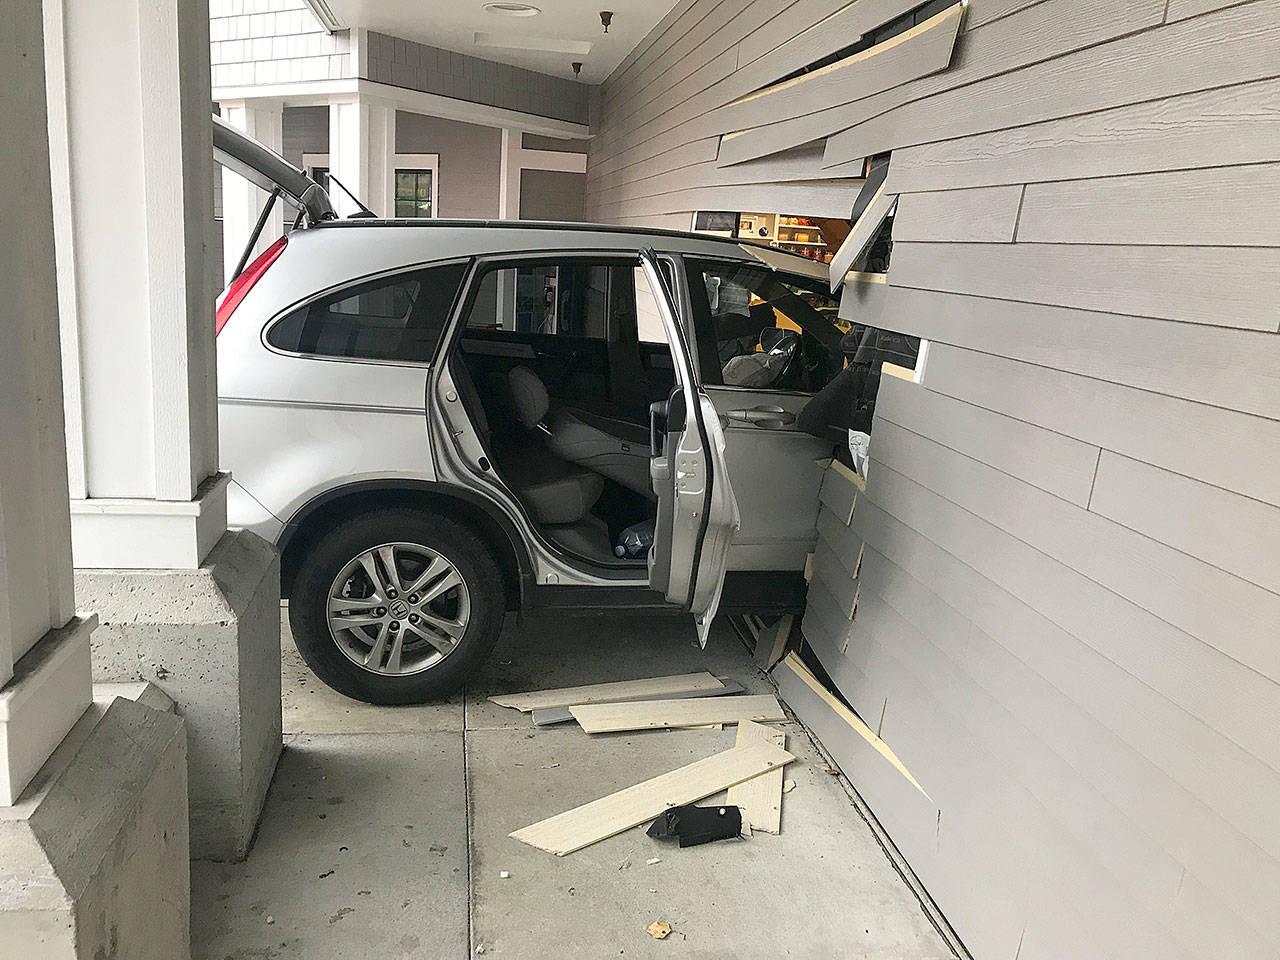 A car crashed into Linds Jewelry on Friday afternoon in Freeland. Photo provided